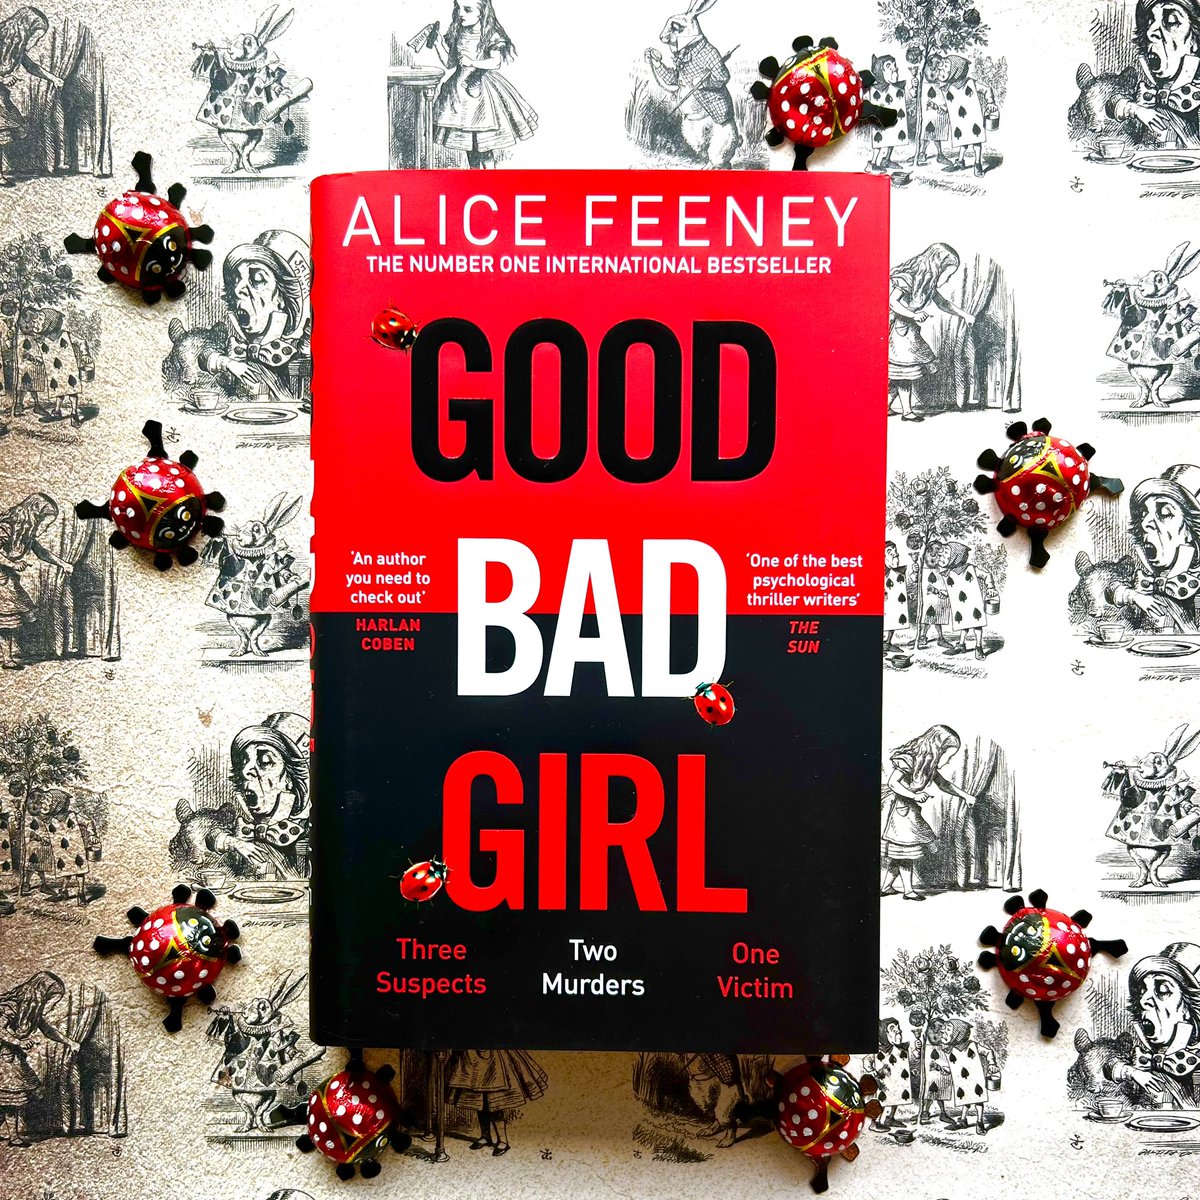 Finished copies of the stunning UK edition of GOOD BAD GIRL have arrived! My new book will be in all good bookshops from 3rd August, but I have one signed copy (and ladybird chocolates!) to give away now. For a chance to win just RT & follow me. Open worldwide. Closes 24.07.23.